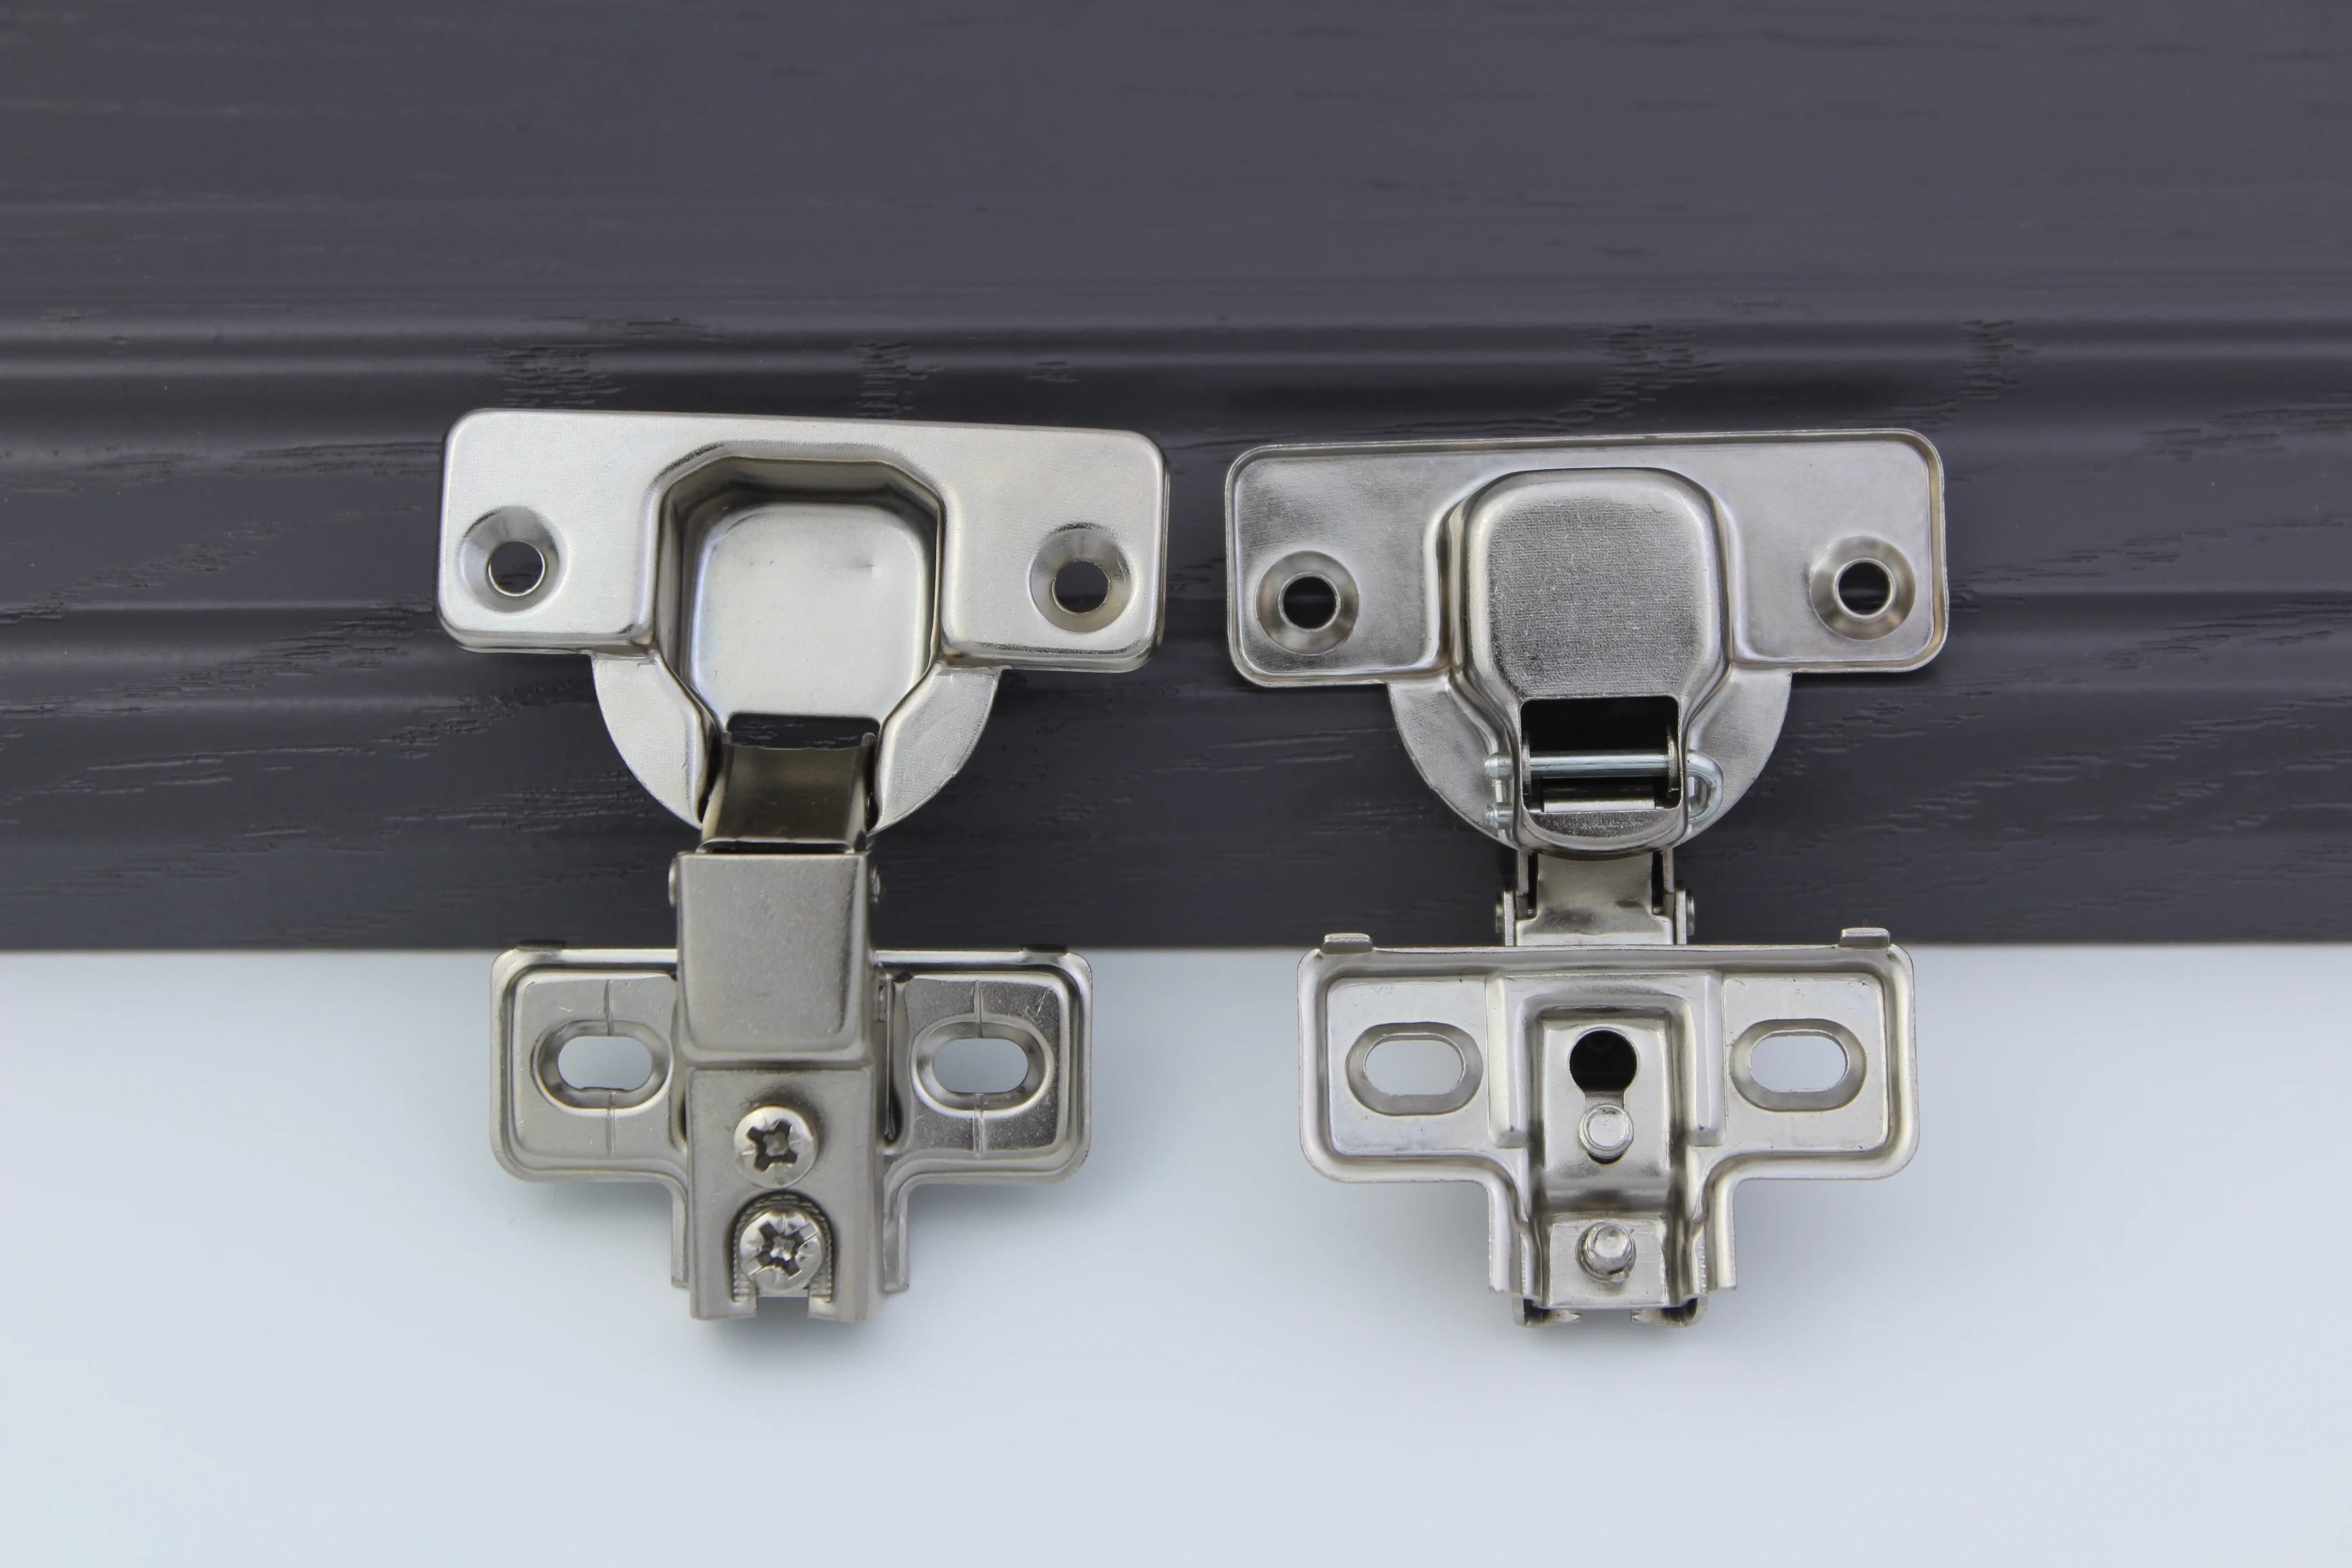 Best quality slide on american type furniture hinges